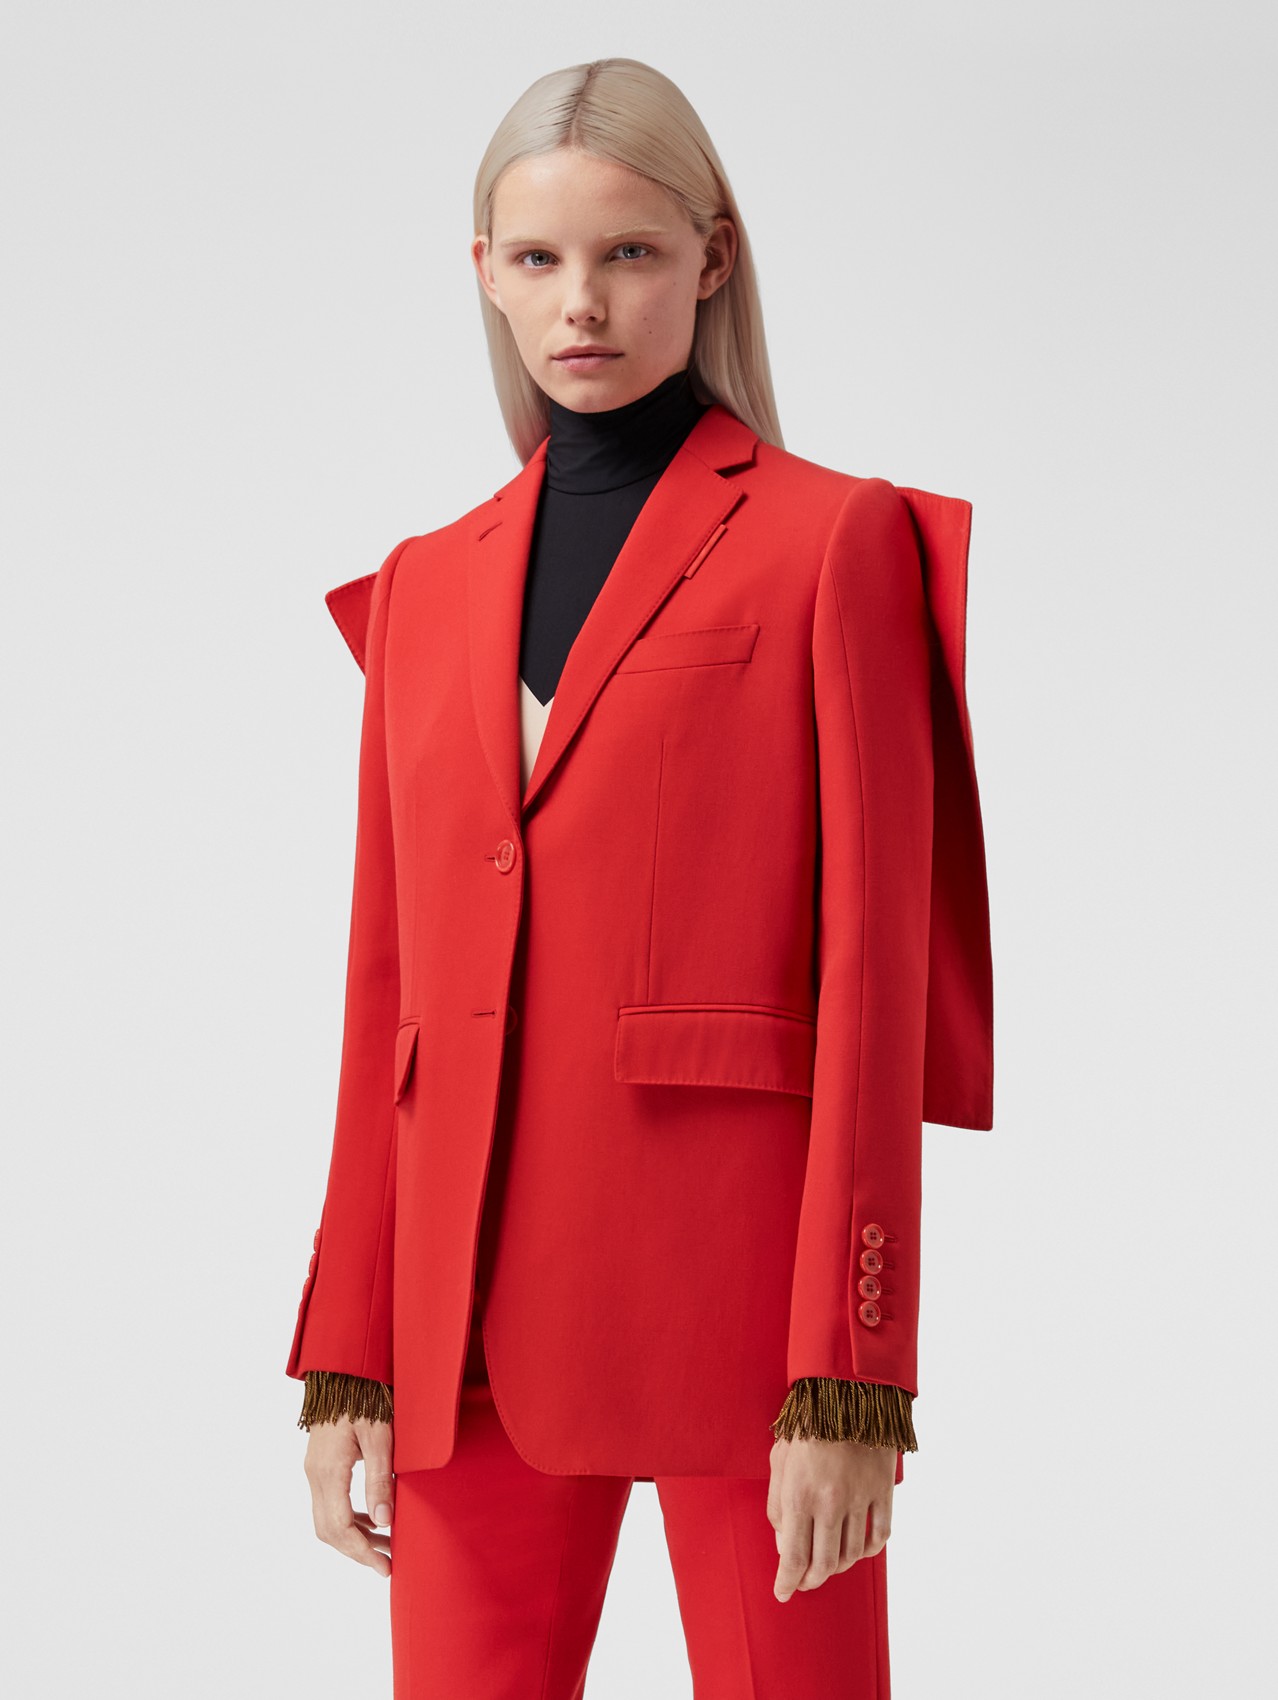 Panel Detail Grain de Poudre Wool Tailored Jacket in Bright Red